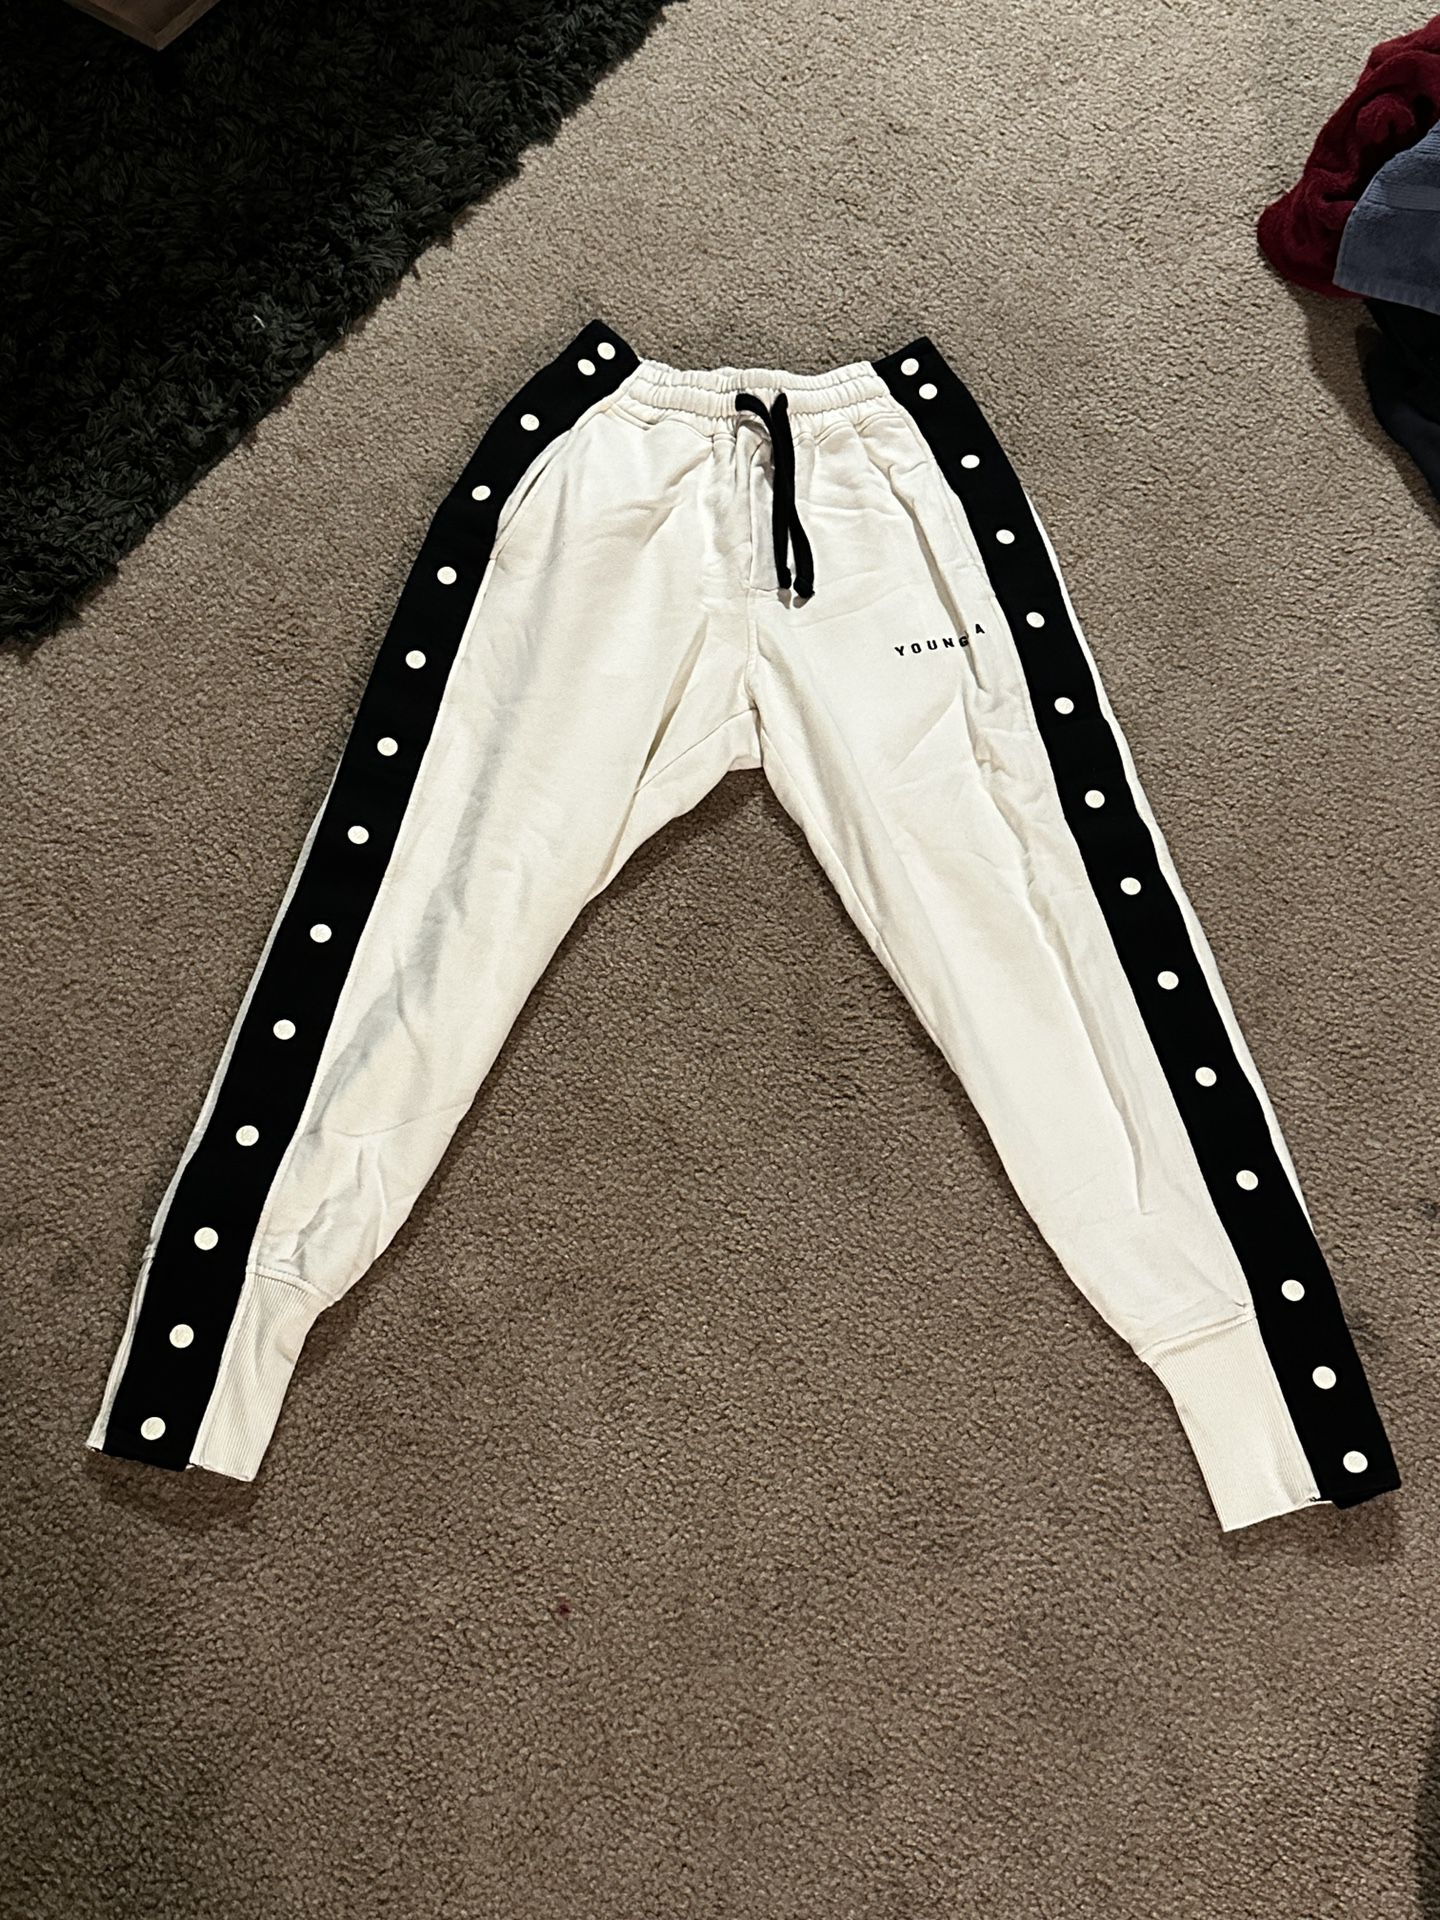 Youngla 90s Tear Away Joggers for Sale in San Diego, CA - OfferUp